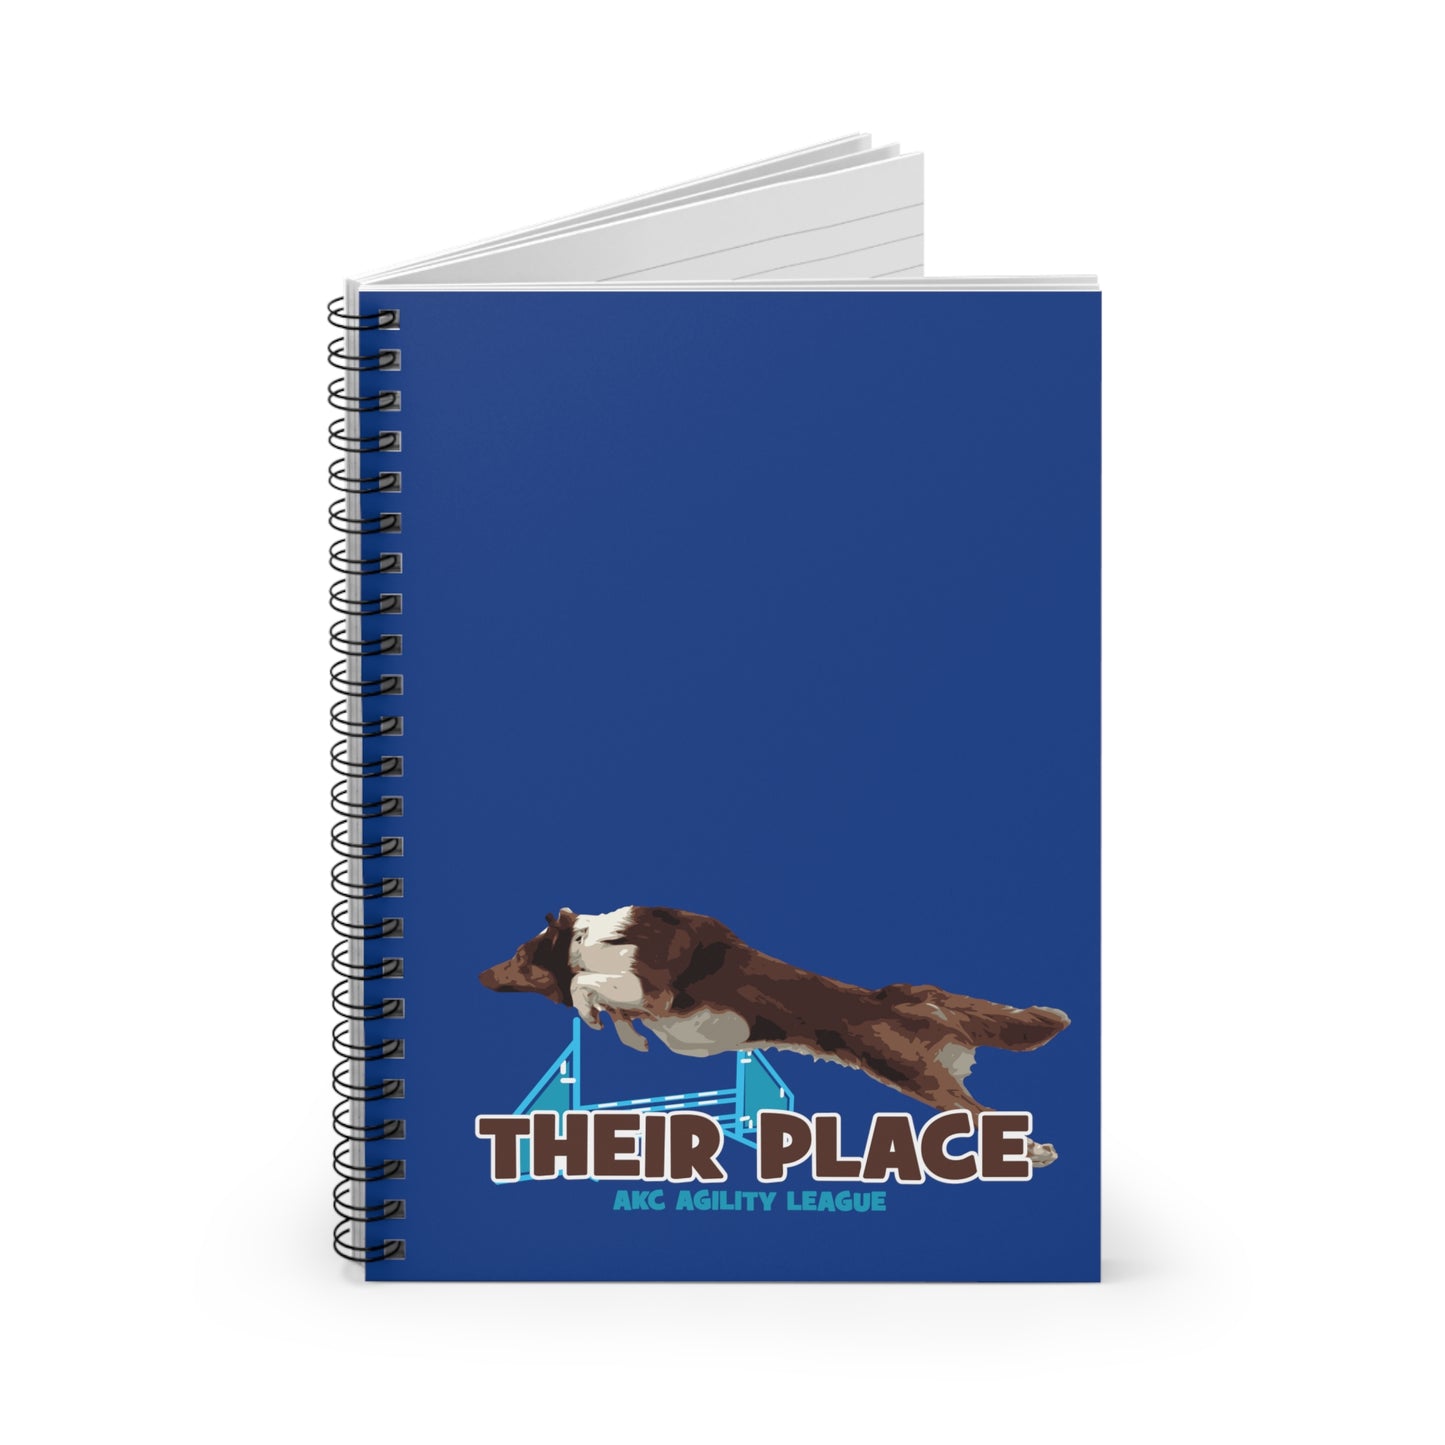 AKC AGILITY LEAGUE Spiral Notebook - Ruled Line